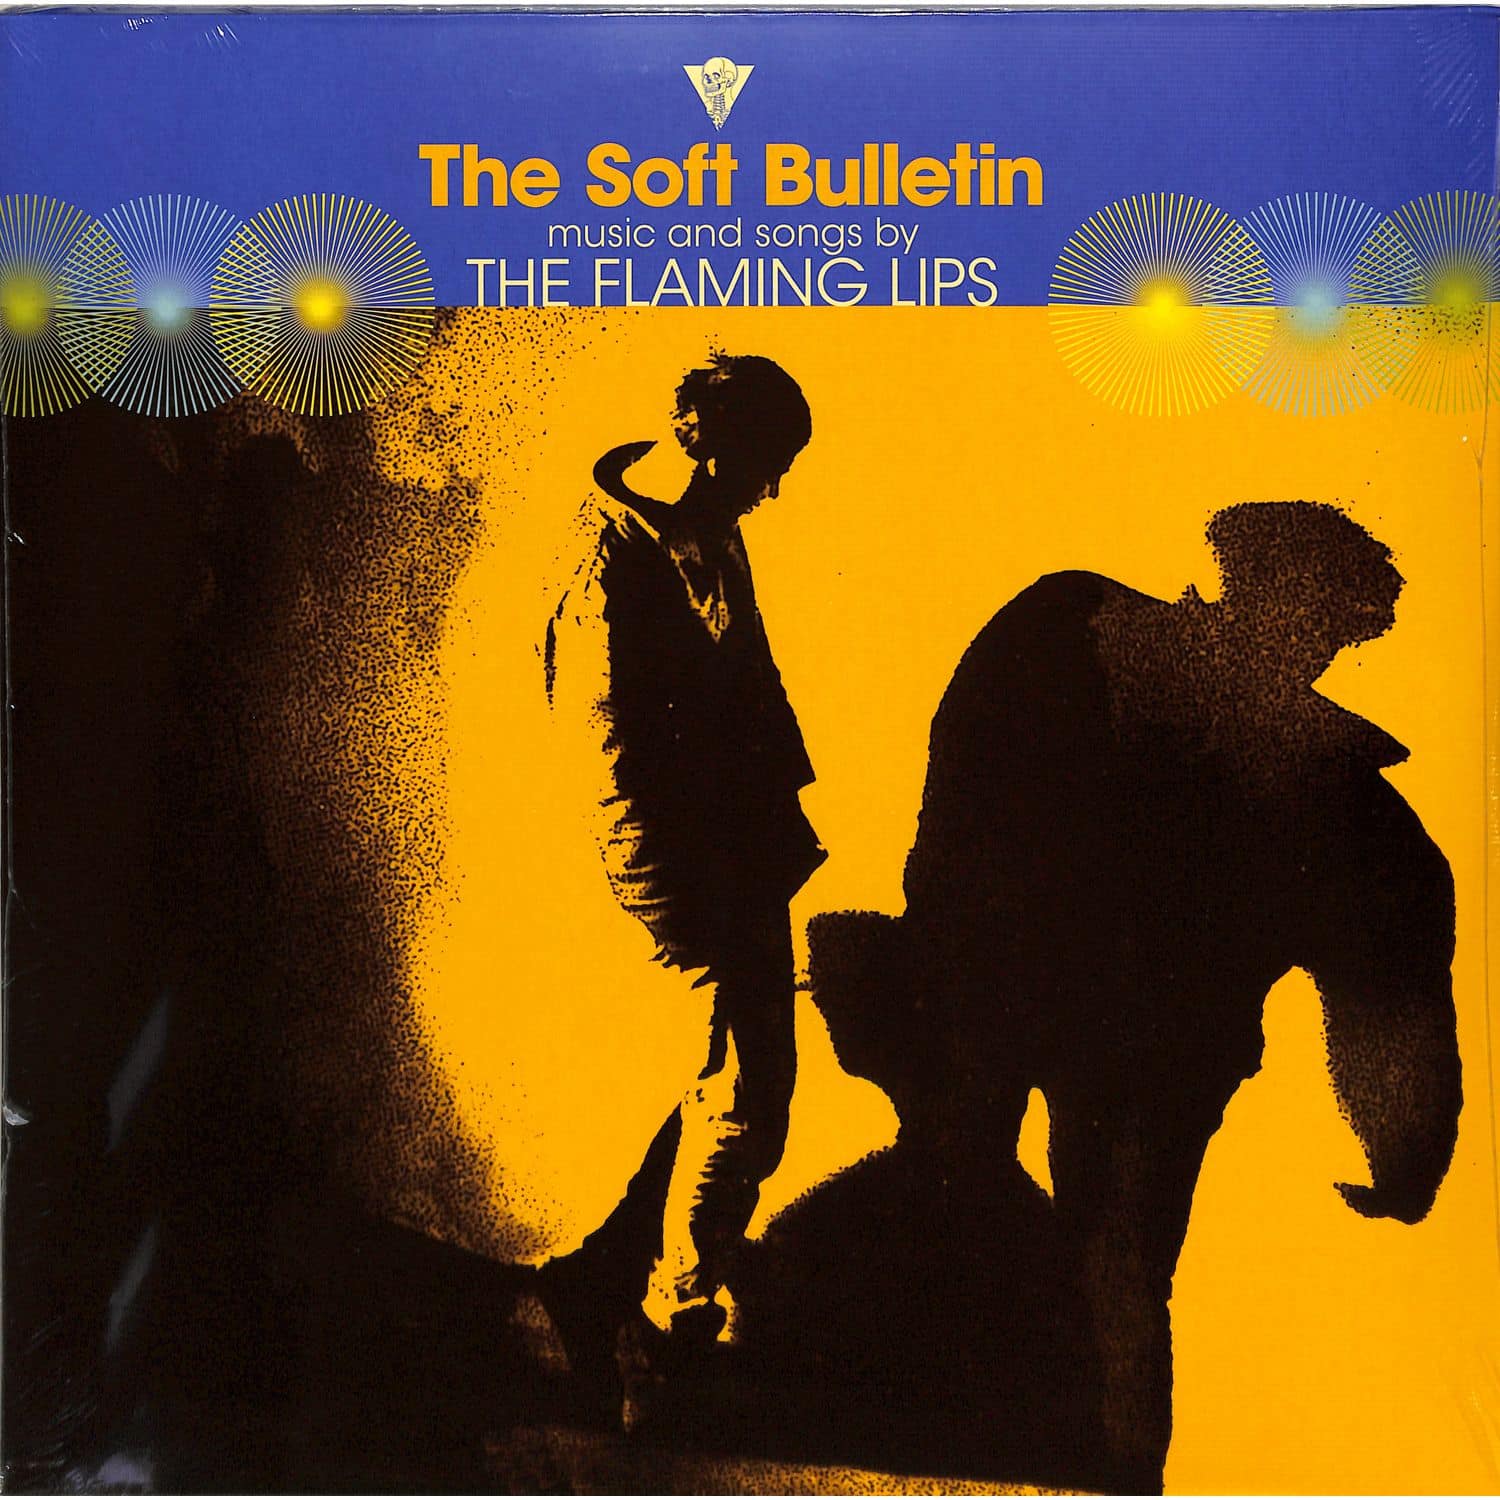 The Flaming Lips - THE SOFT BULLETIN 